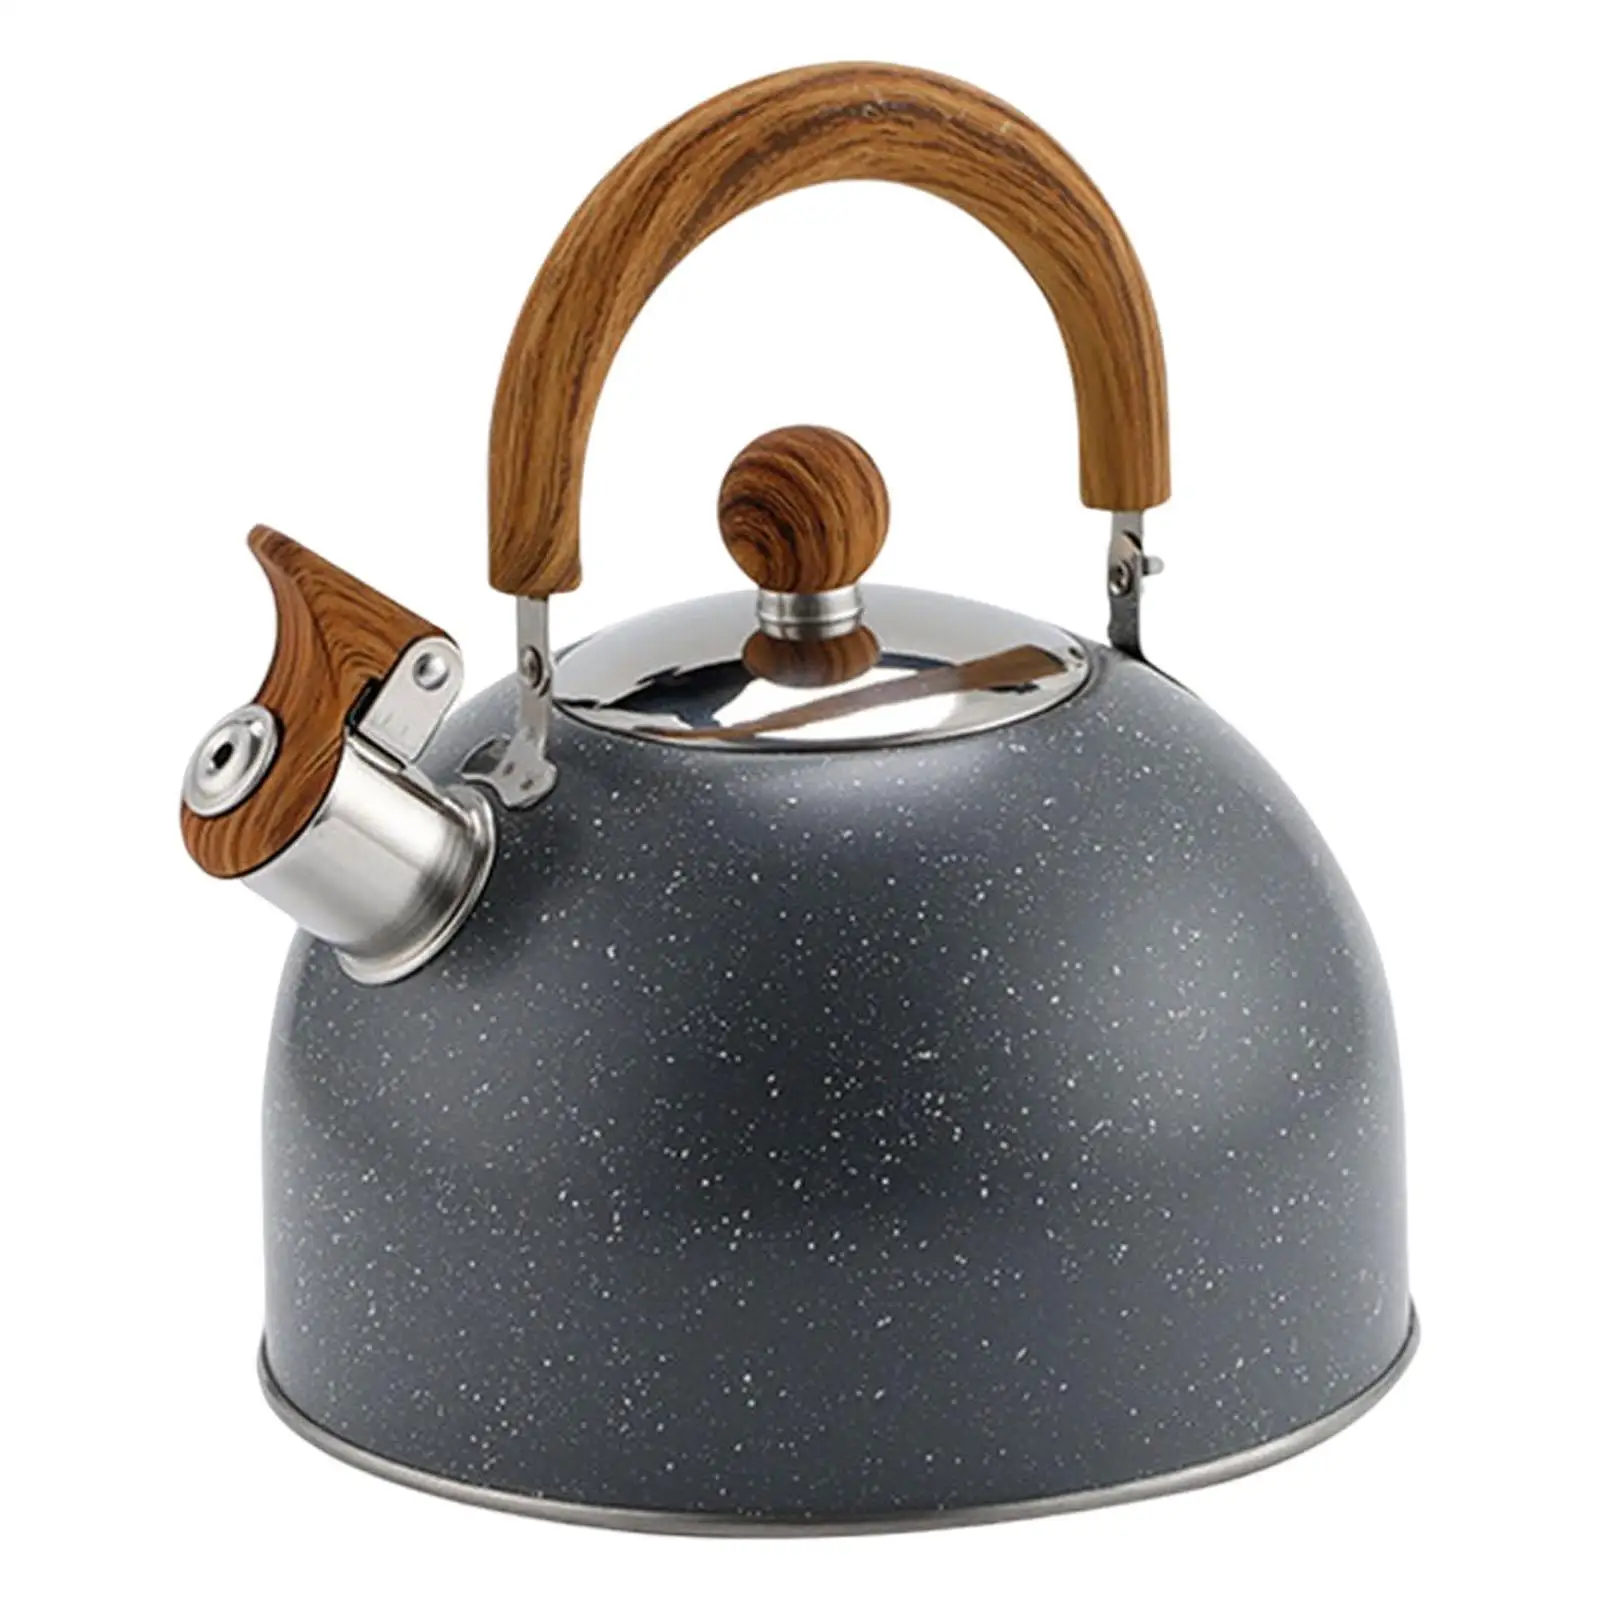 2.5L Whistling Kettle Anti Hot Handle Fast Heating Cookware Food Grade Stainless Steel Camping Kettles Water Pitcher Teapot